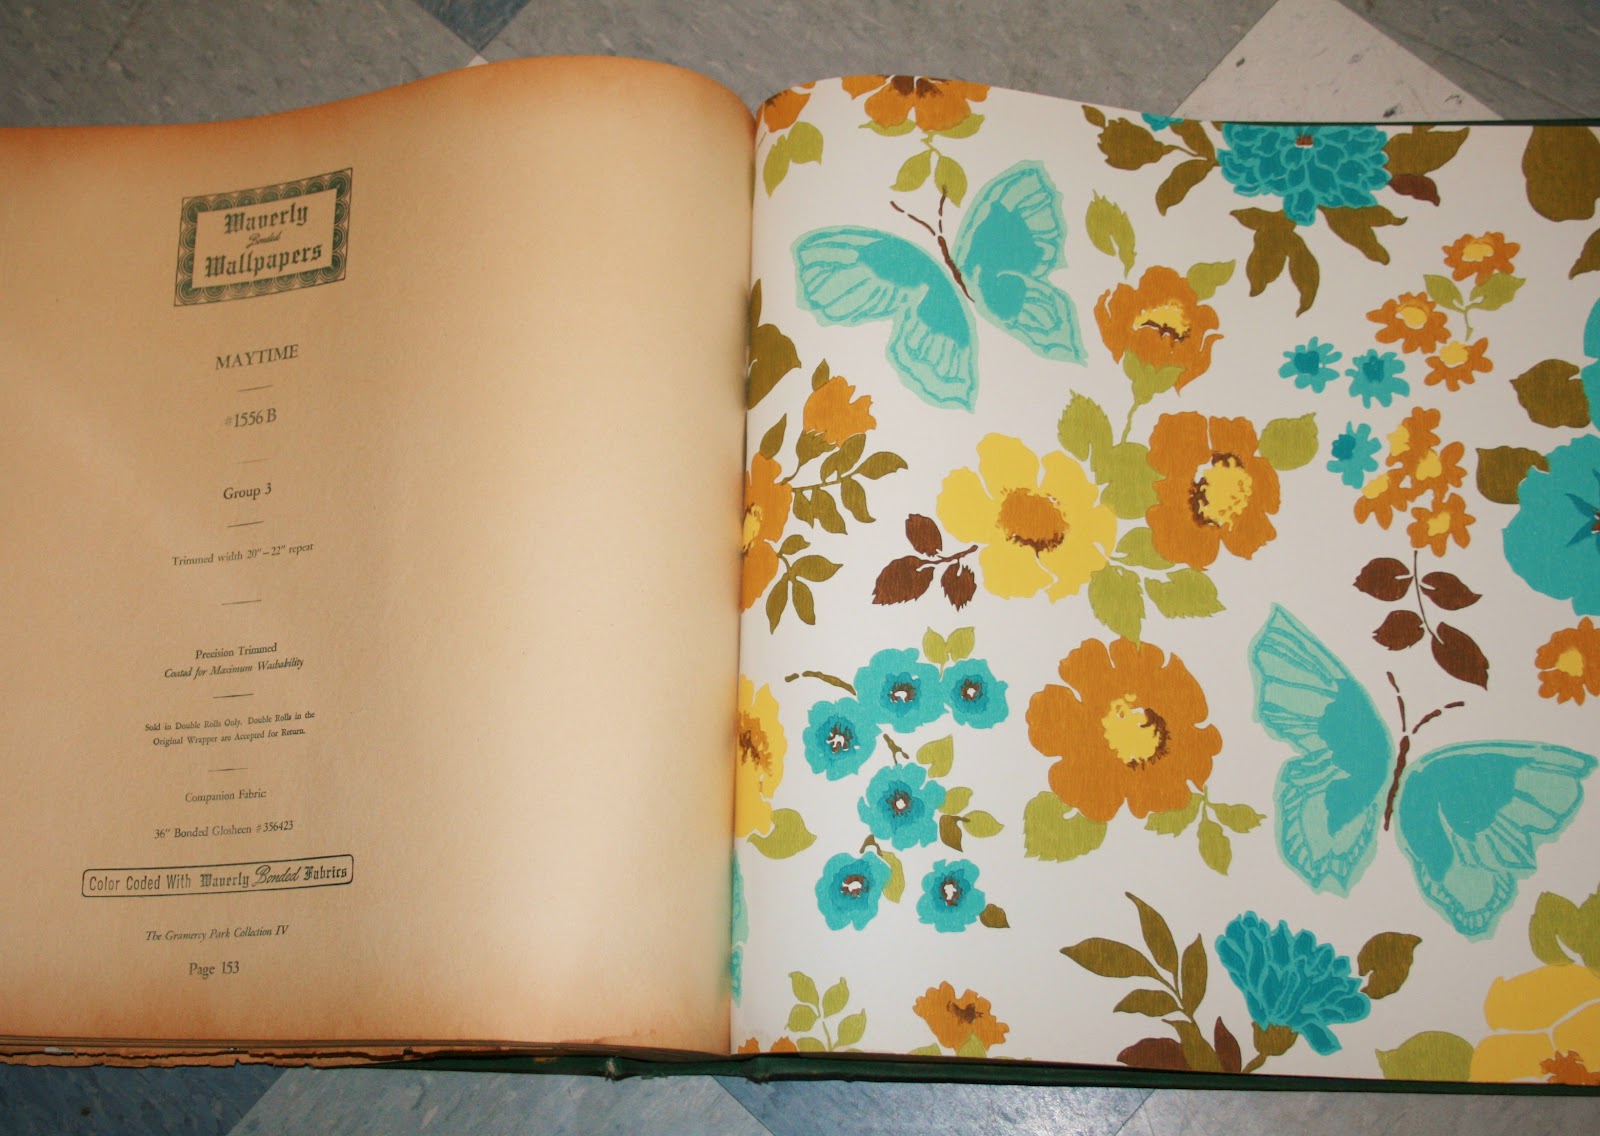 Had Forgotten All About This Huge Vintage Wallpaper Sample Book I